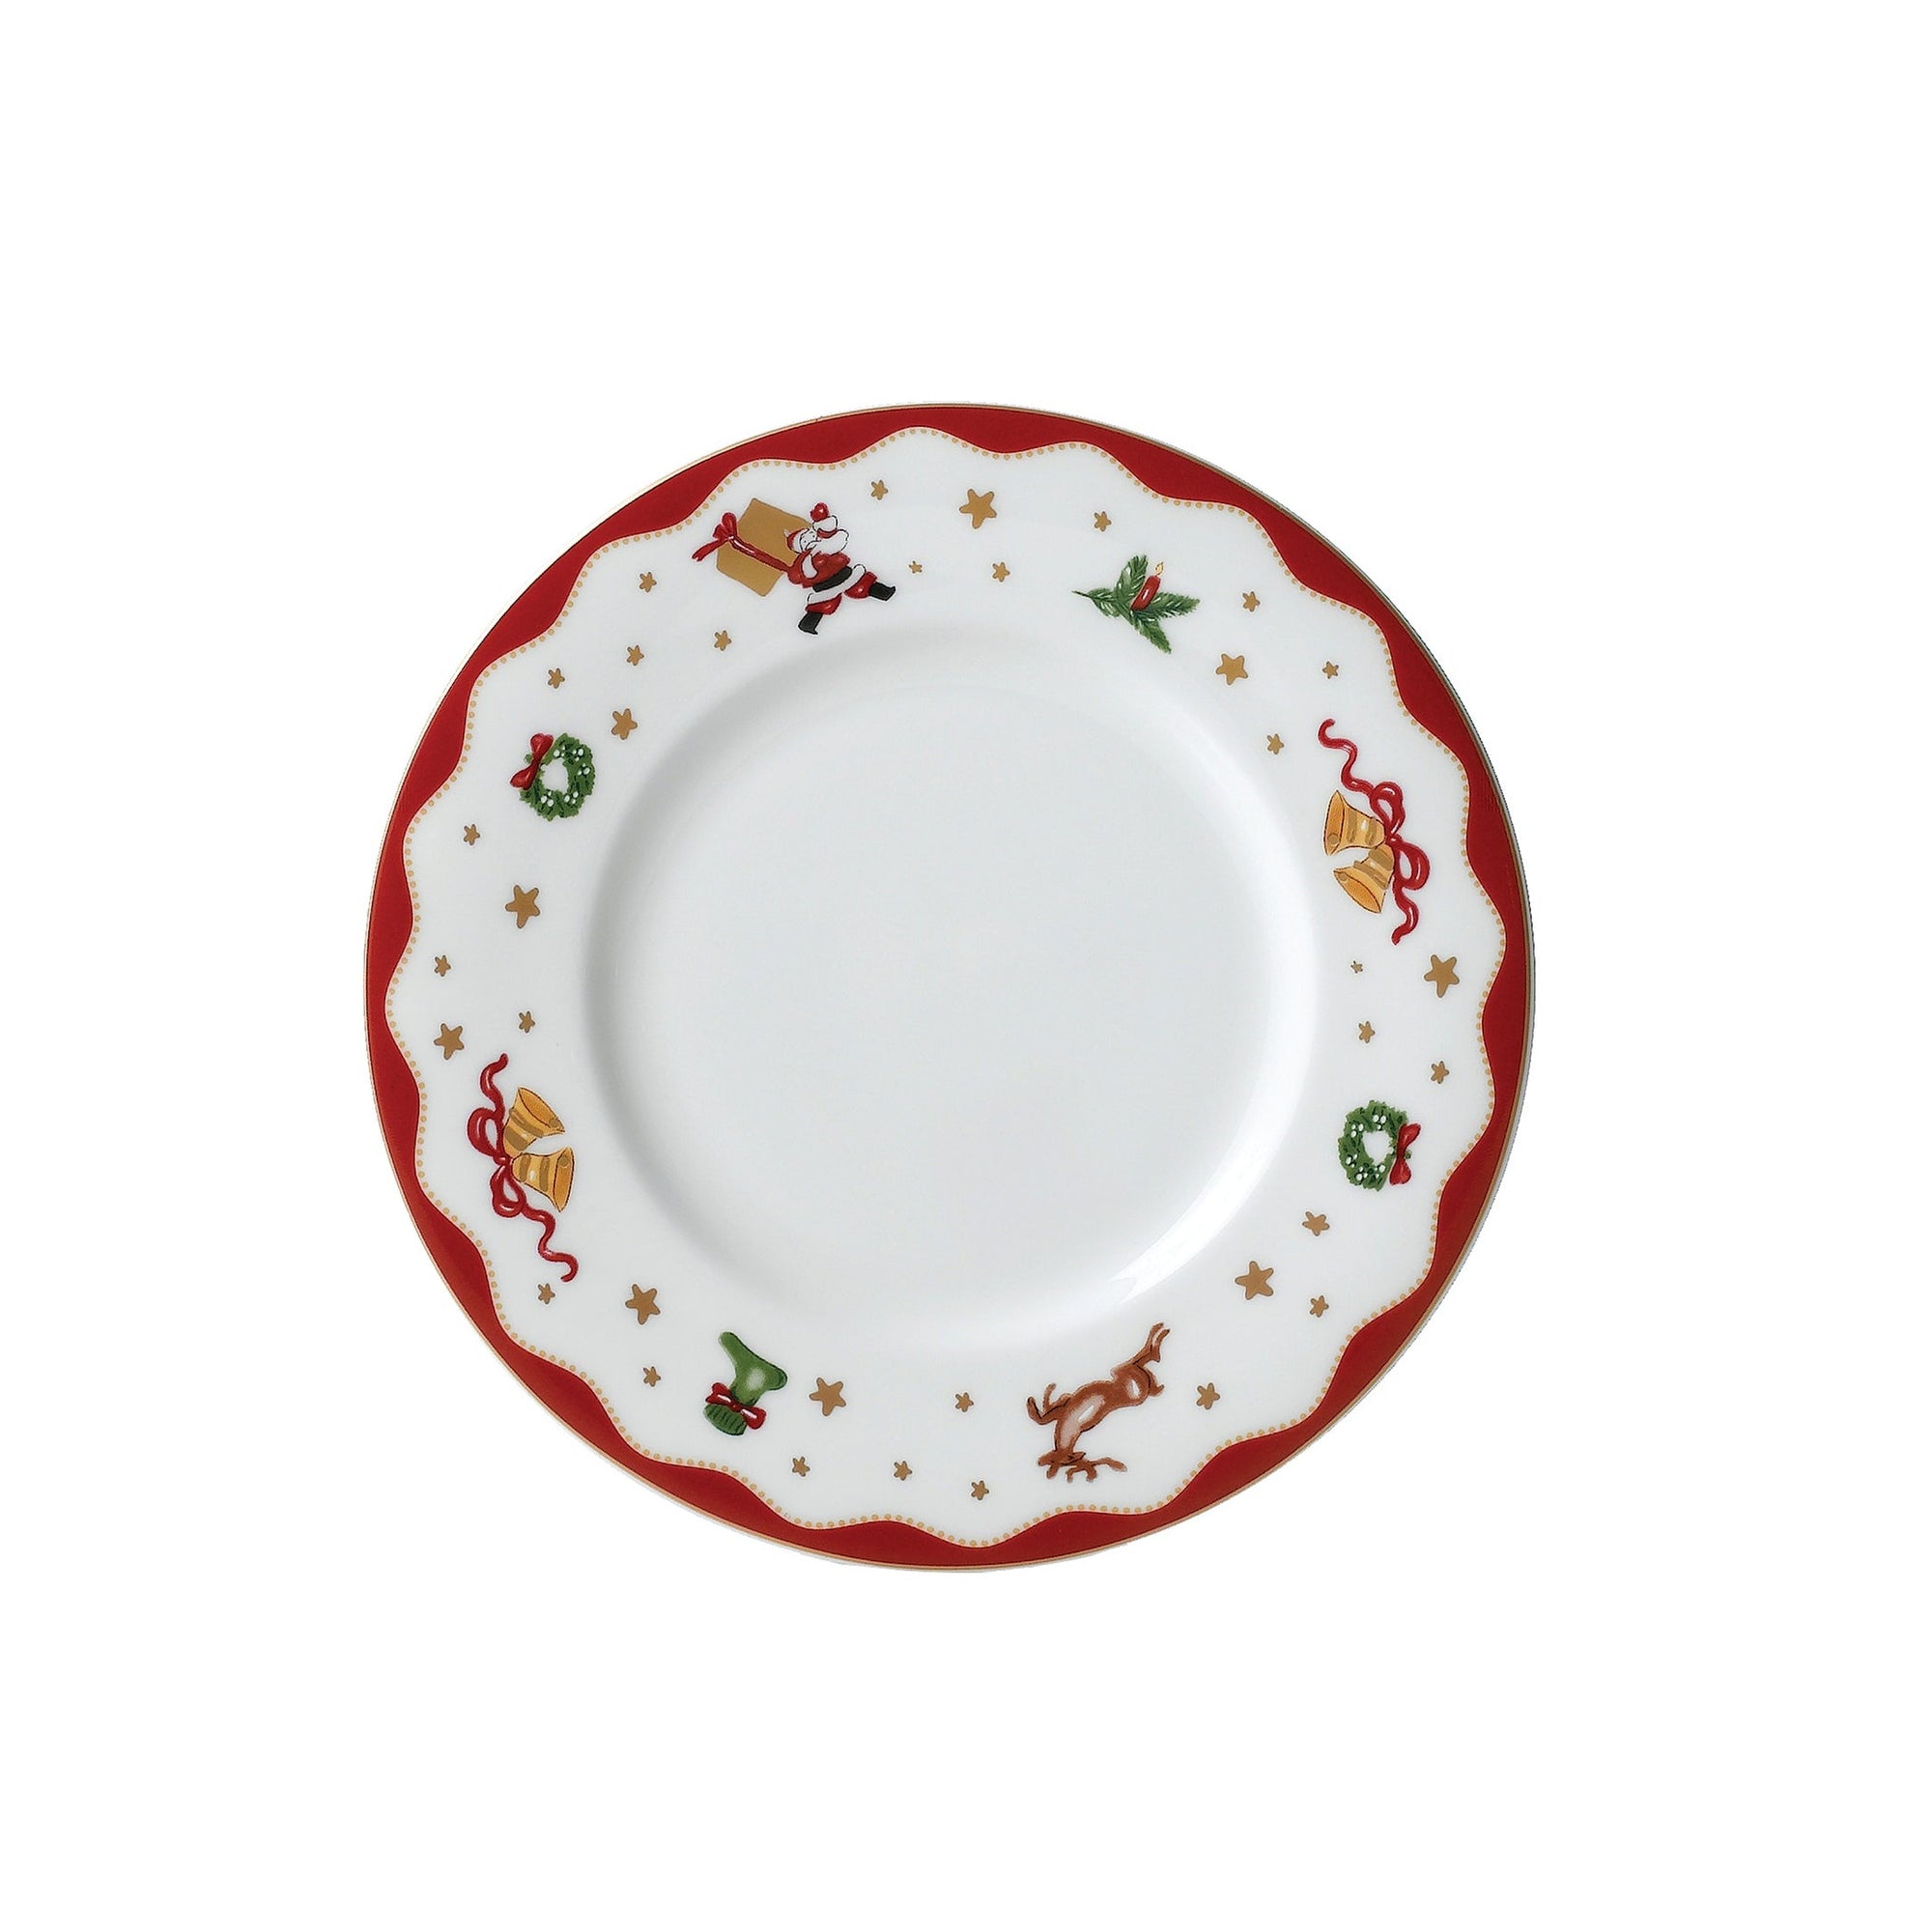 Prouna My Noel 7" bread and butter plate